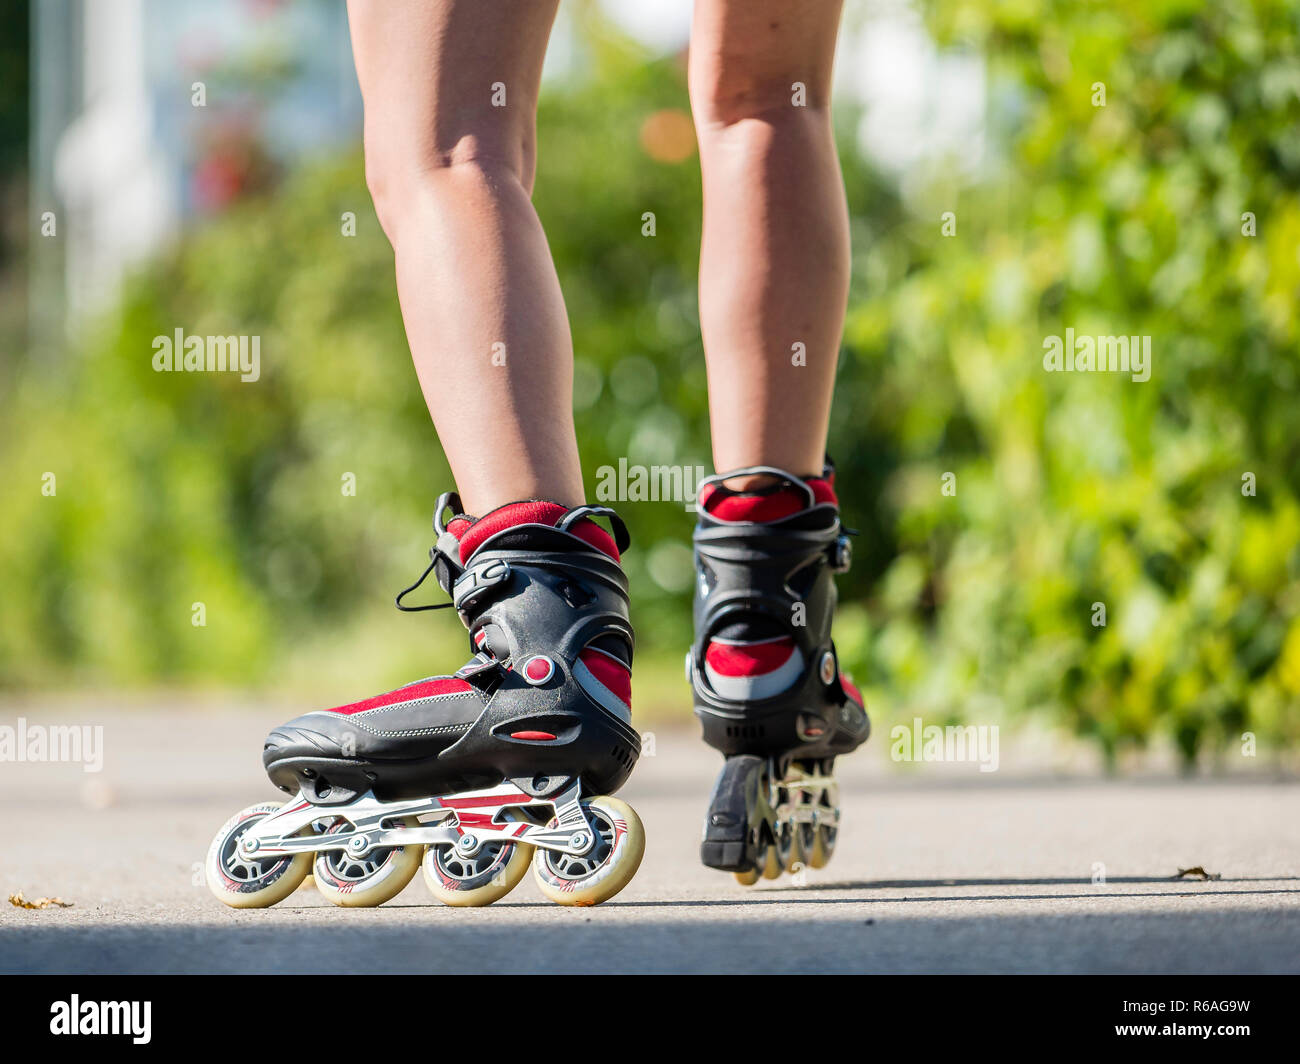 woman,20 years,inline skating,residential area Stock Photo